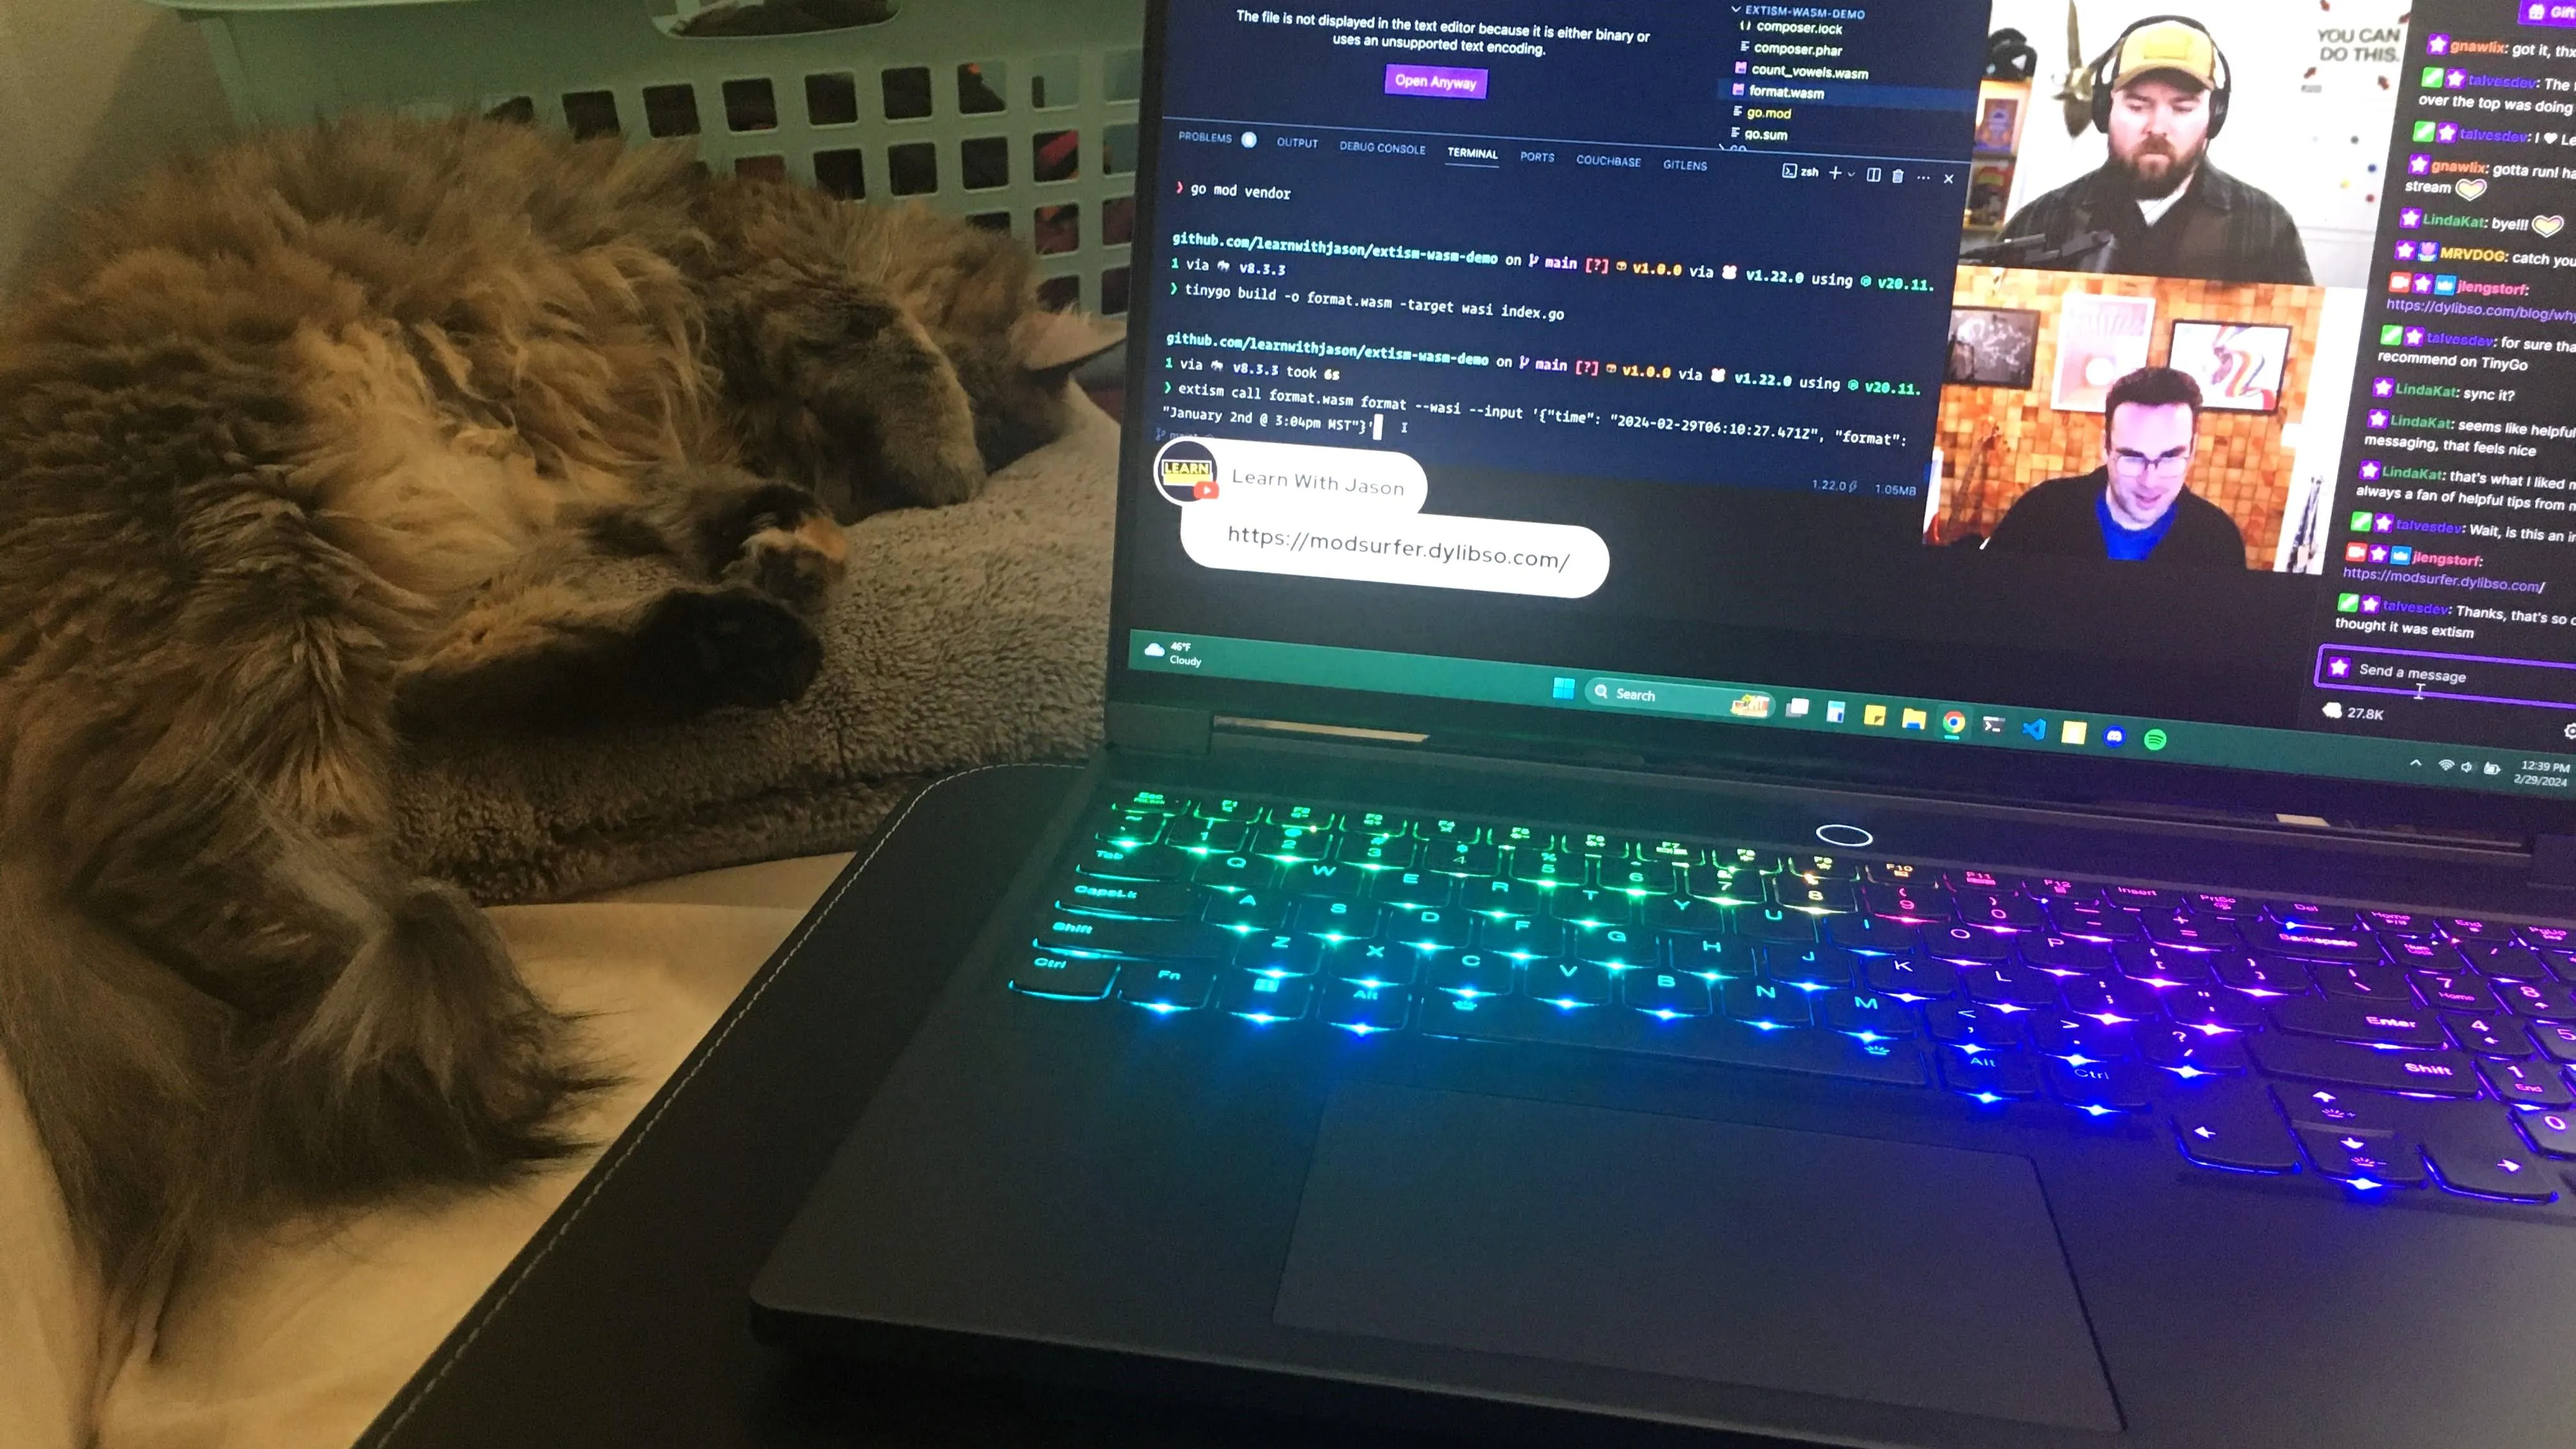 A soft cat sleeps on a tan pillow on the left side of a laptop. The laptop has rainbow glowing keys and shows a programming stream on the screen.